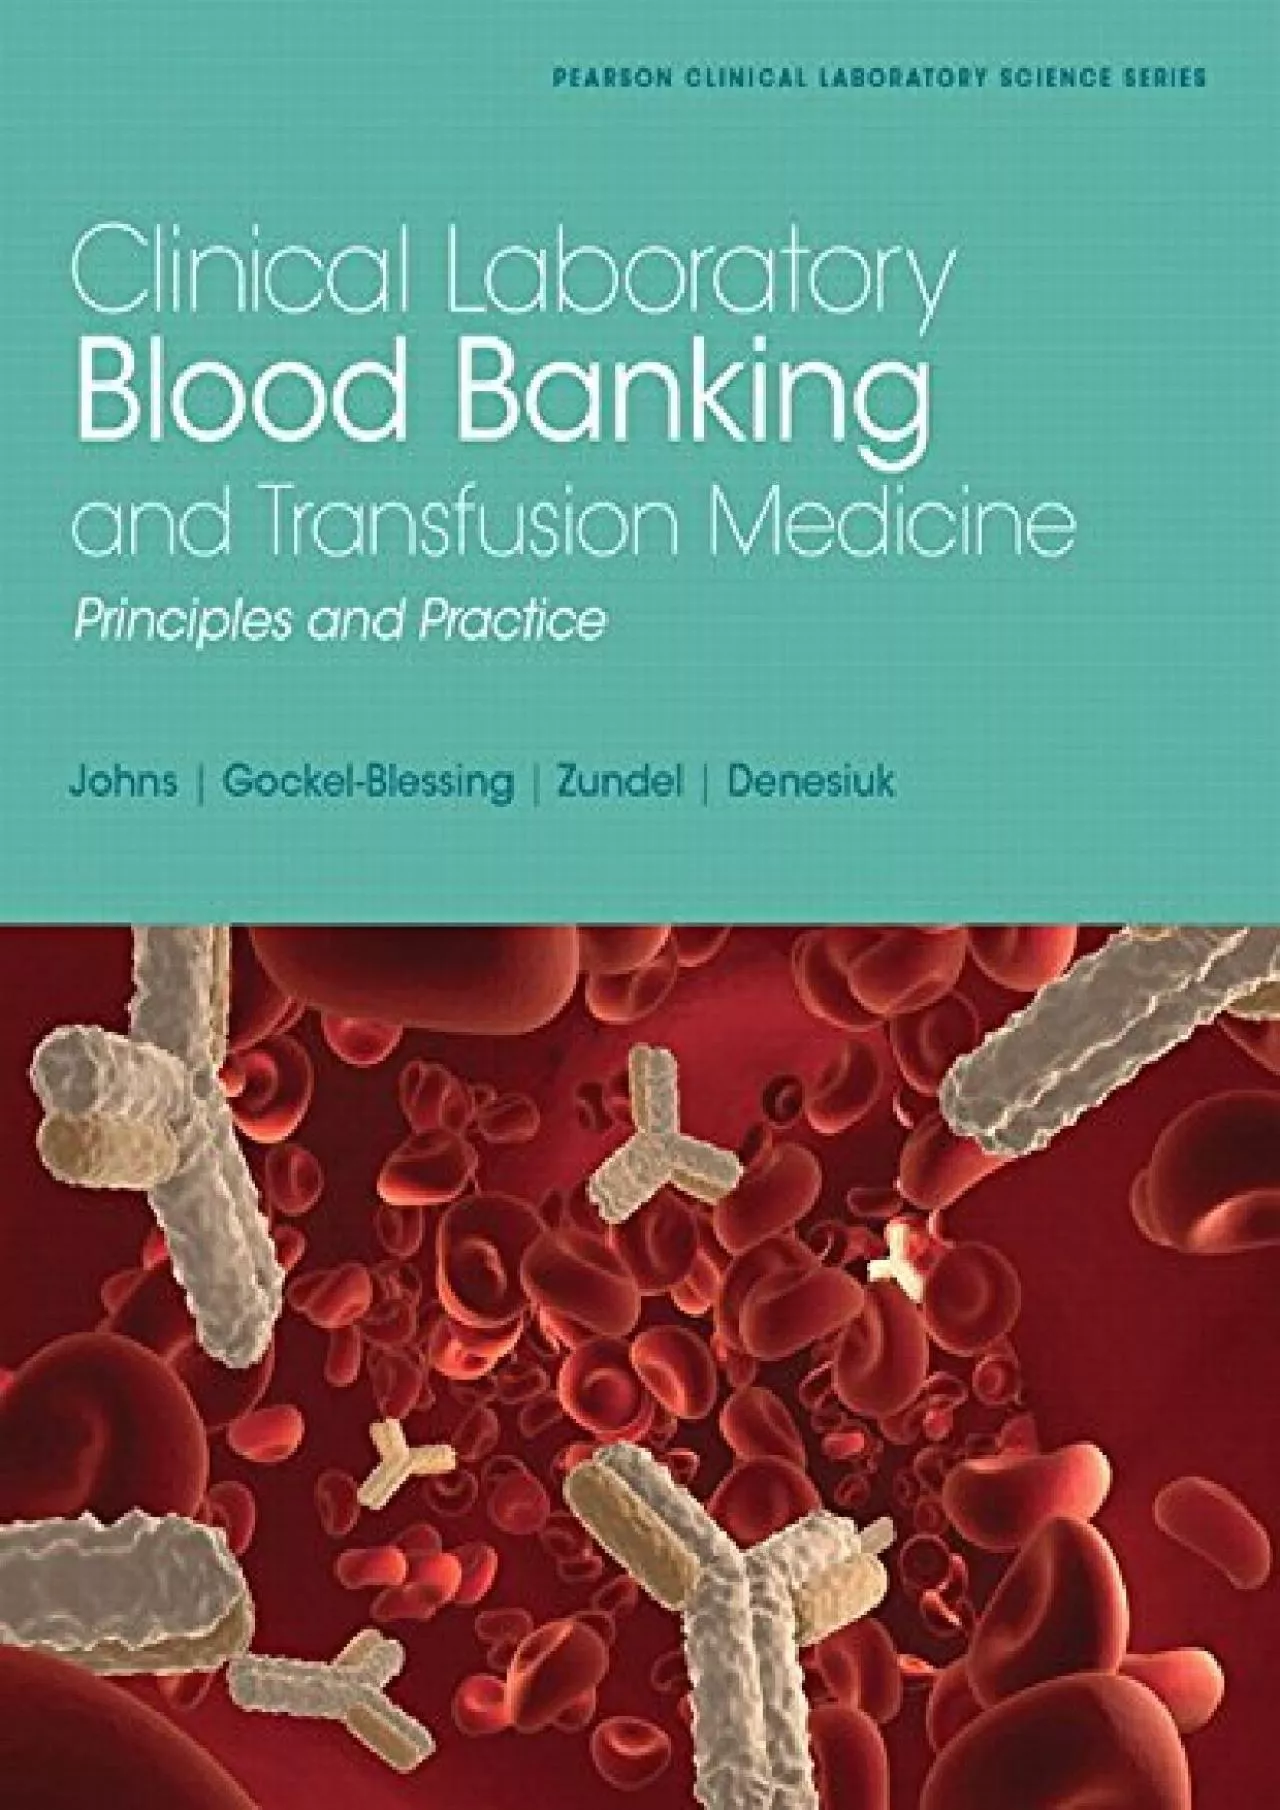 (EBOOK)-Clinical Laboratory Blood Banking and Transfusion Medicine Practices (Pearson